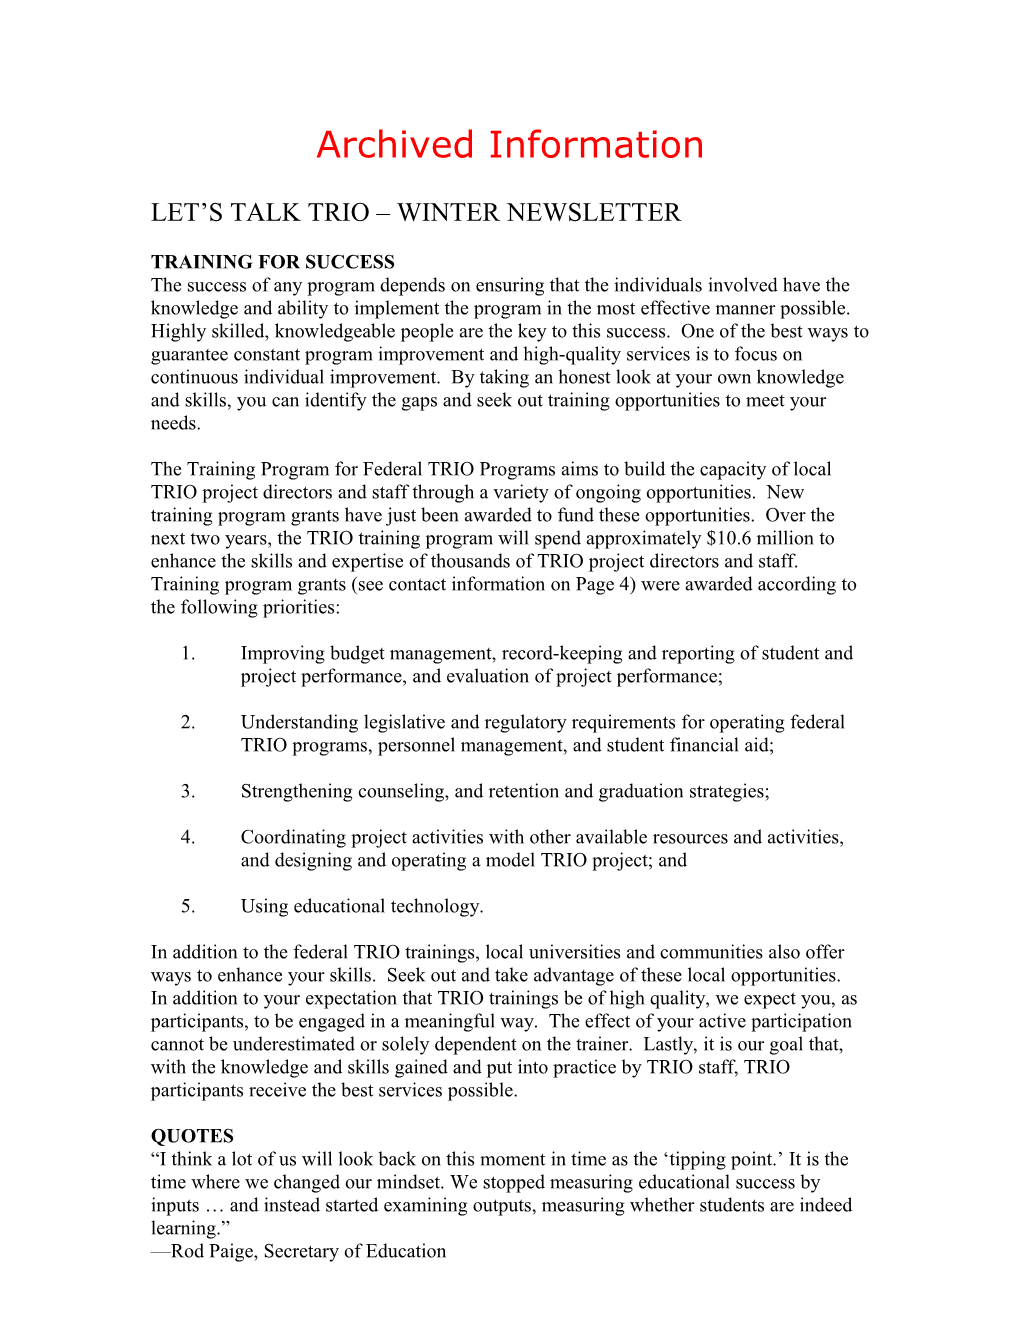 Archived: TRIO Programs Newsletter - Winter 2004 (Word)